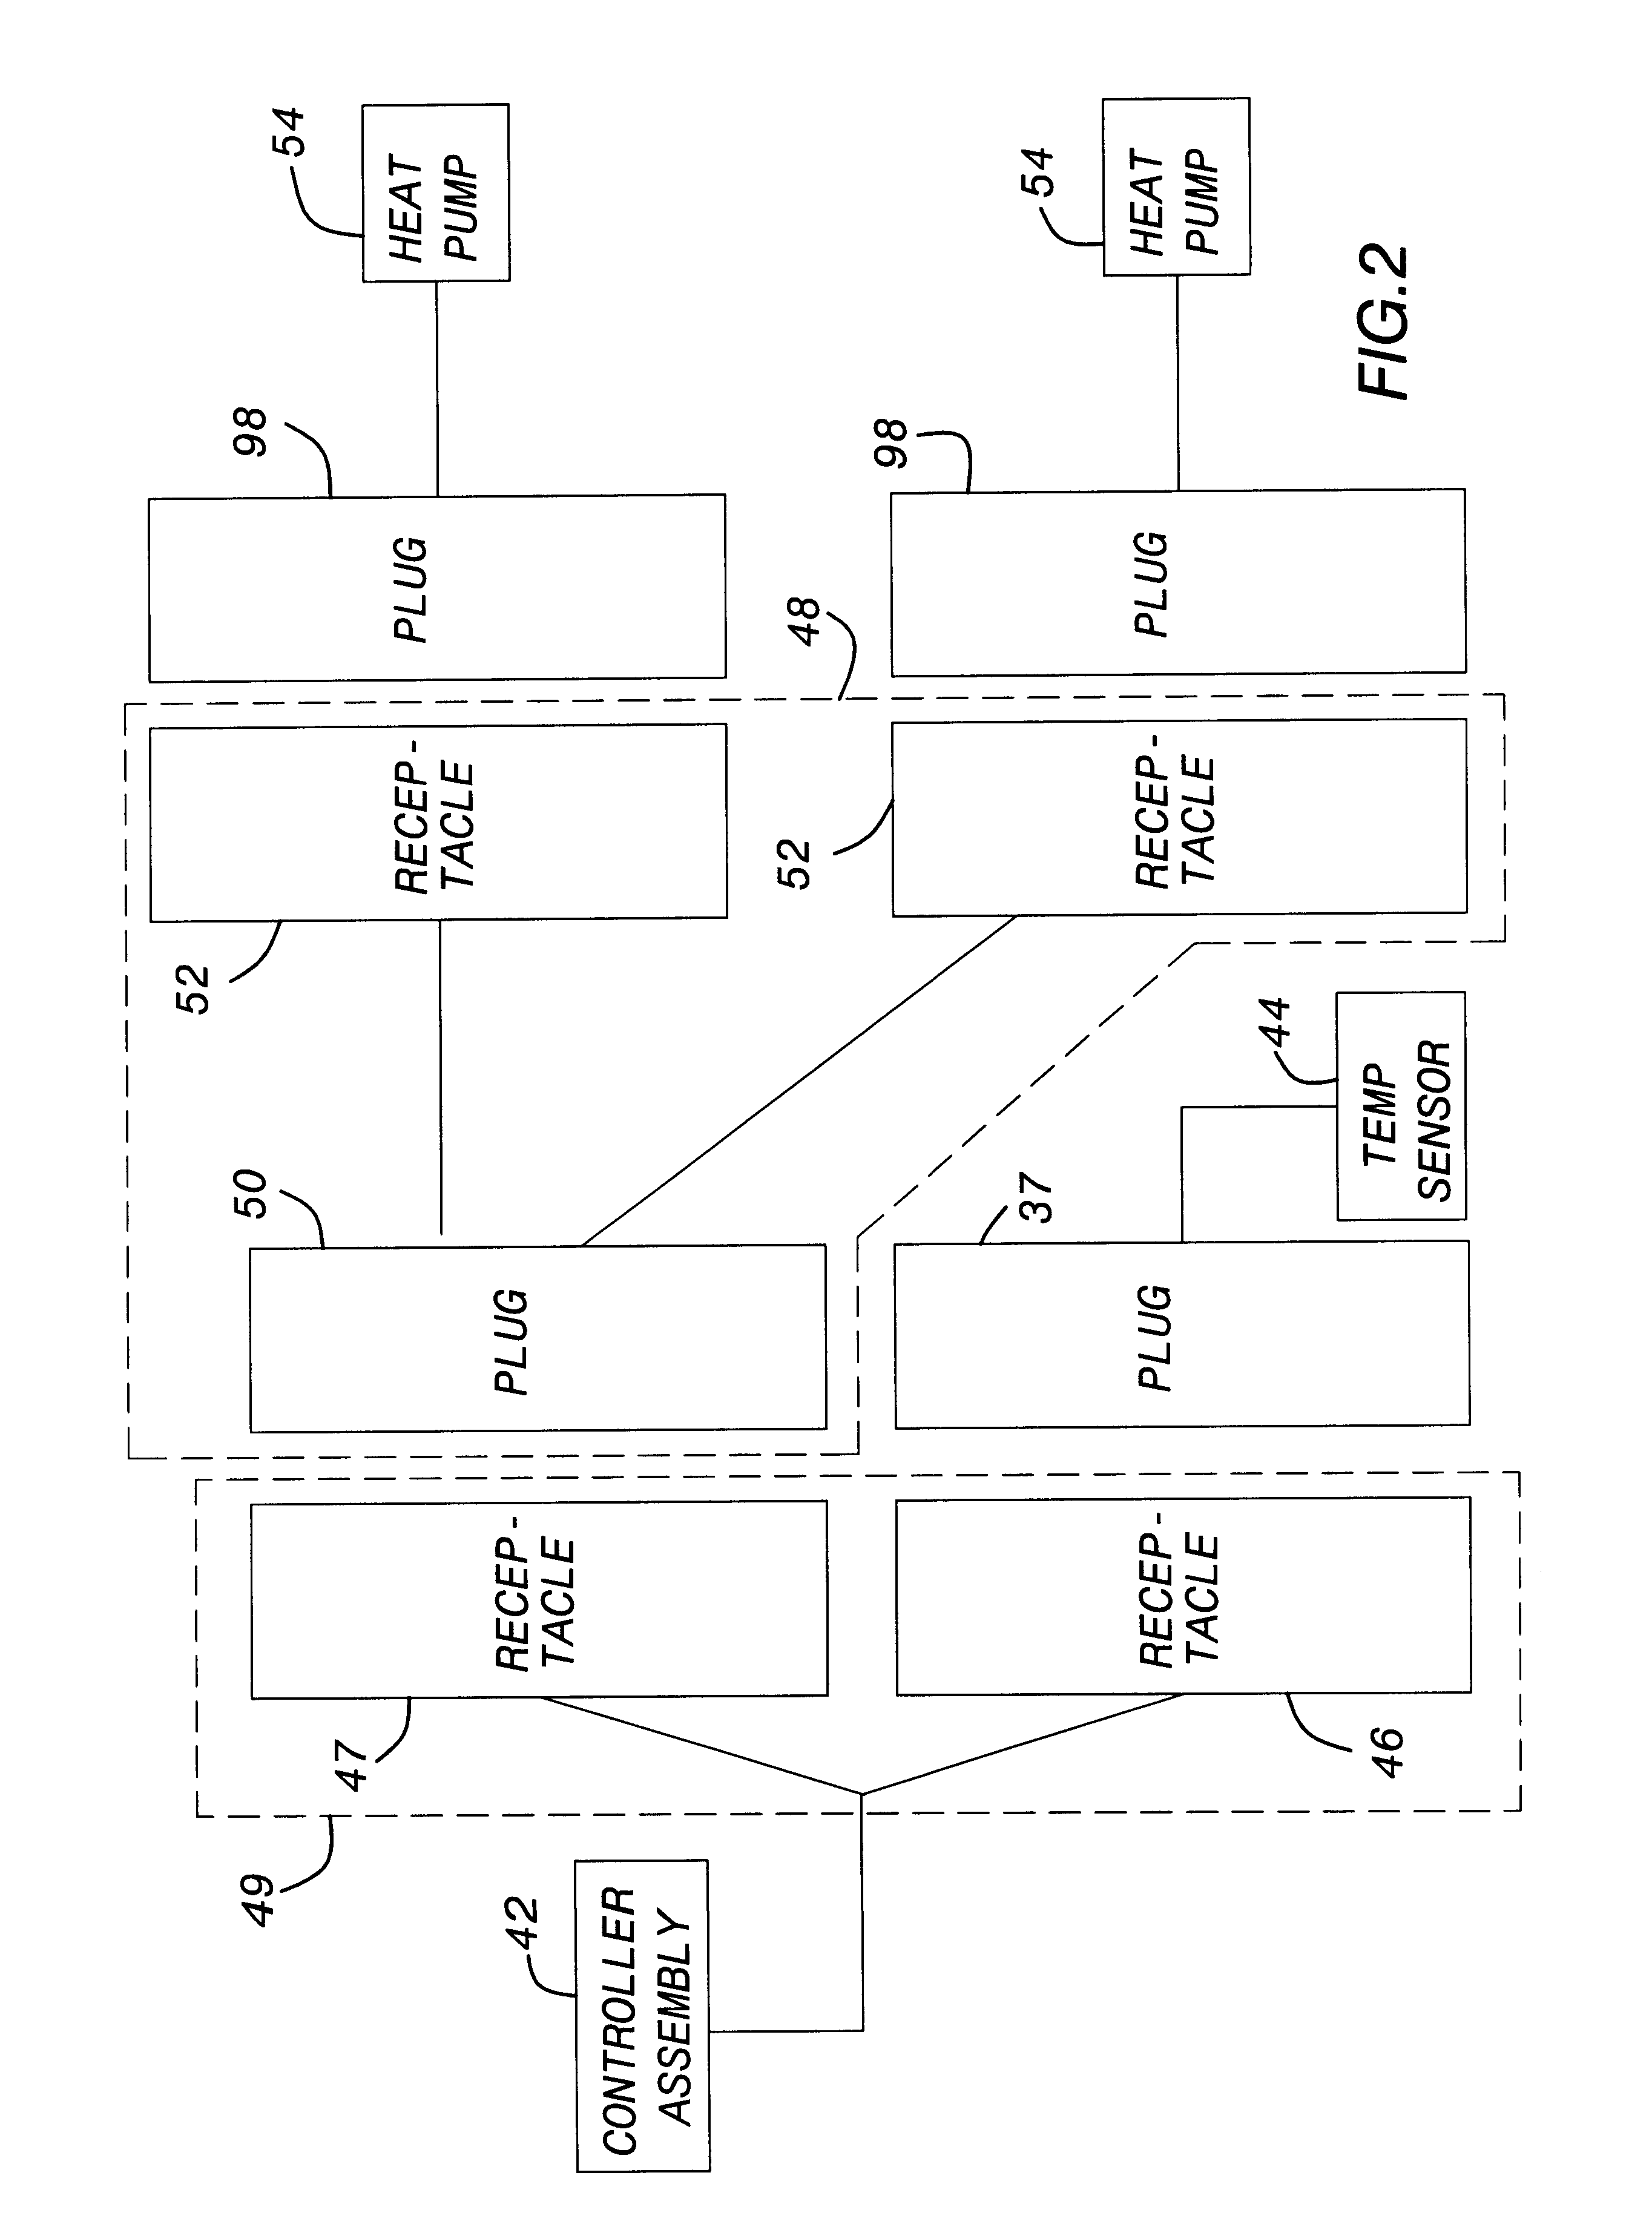 Controlled temperature cabinet system and method